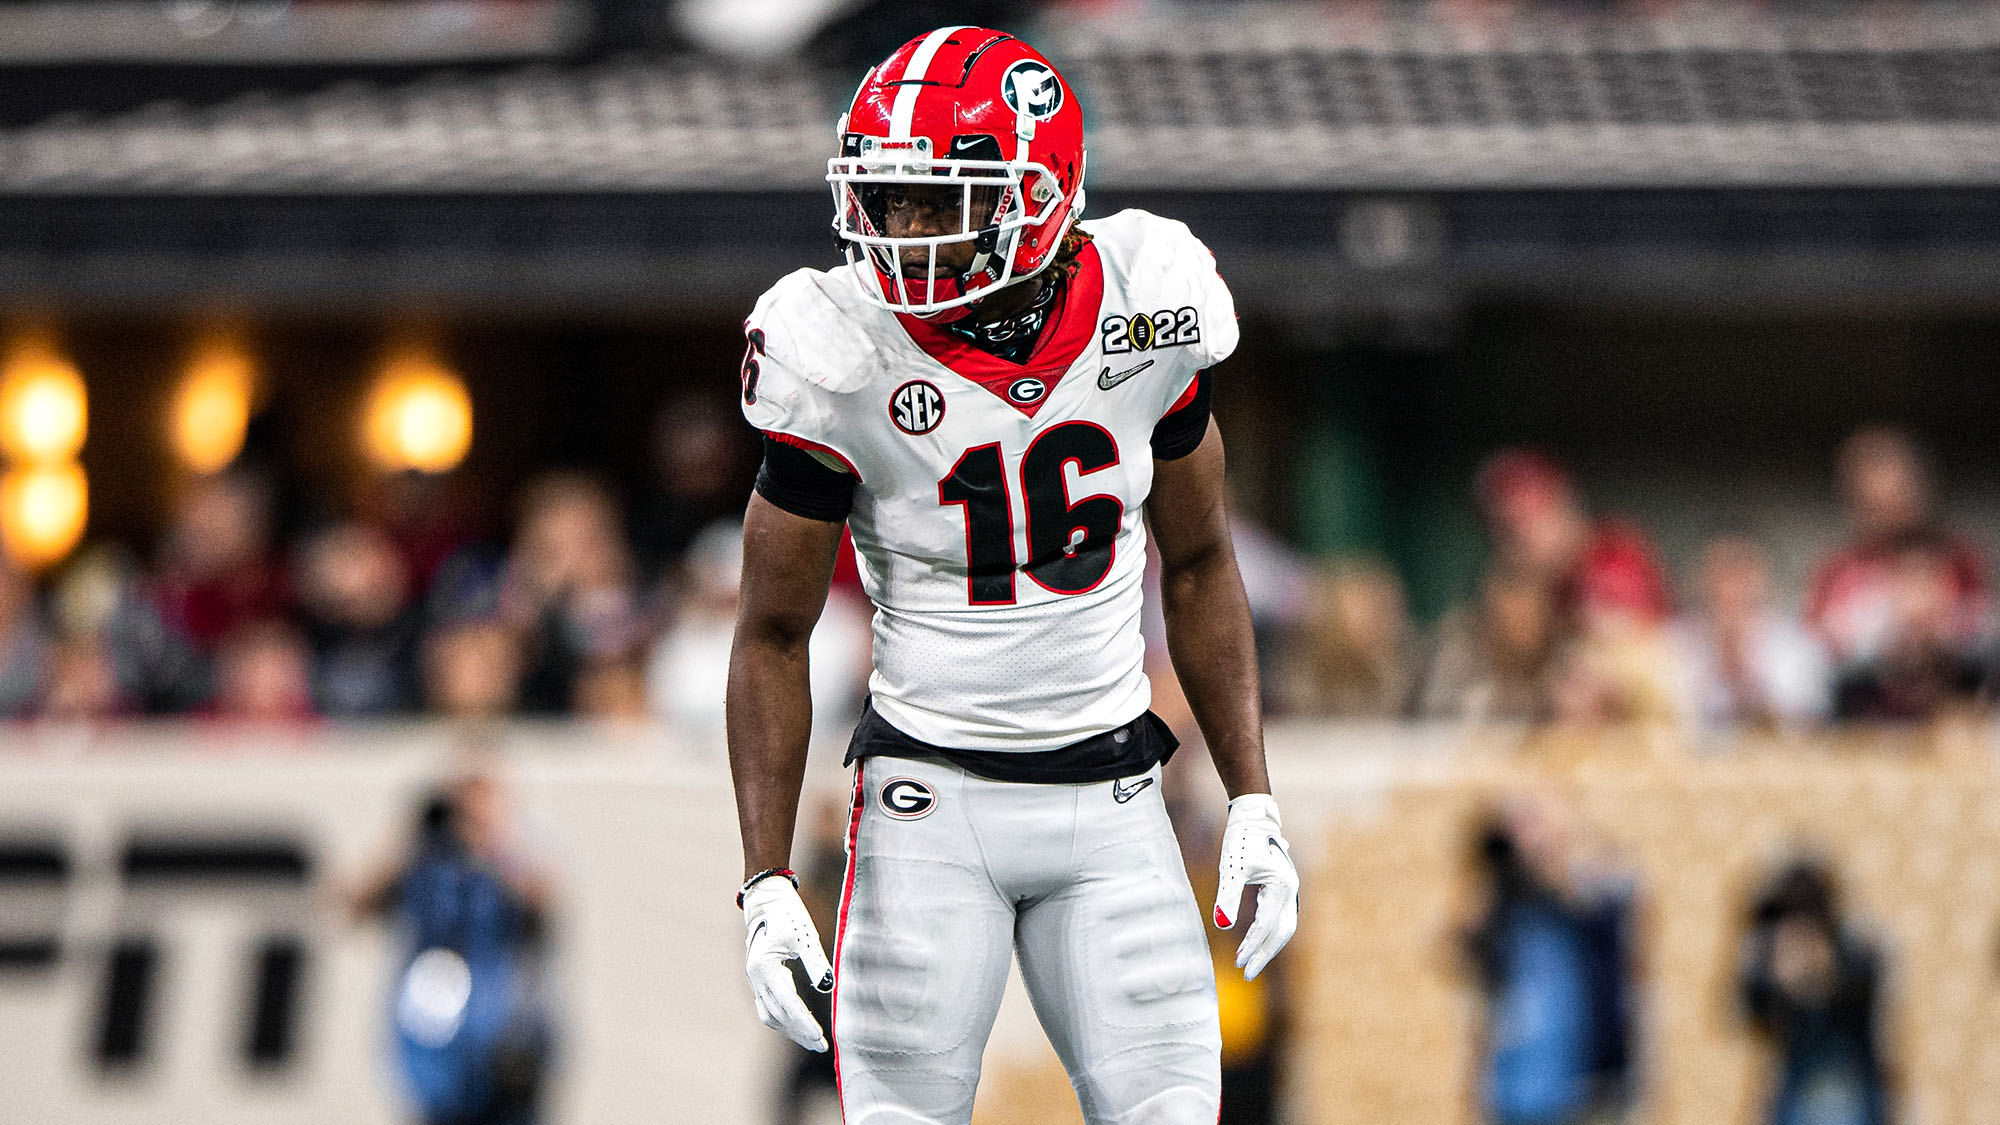 NY Jets draft: Which safety prospect has the best statistical resume?